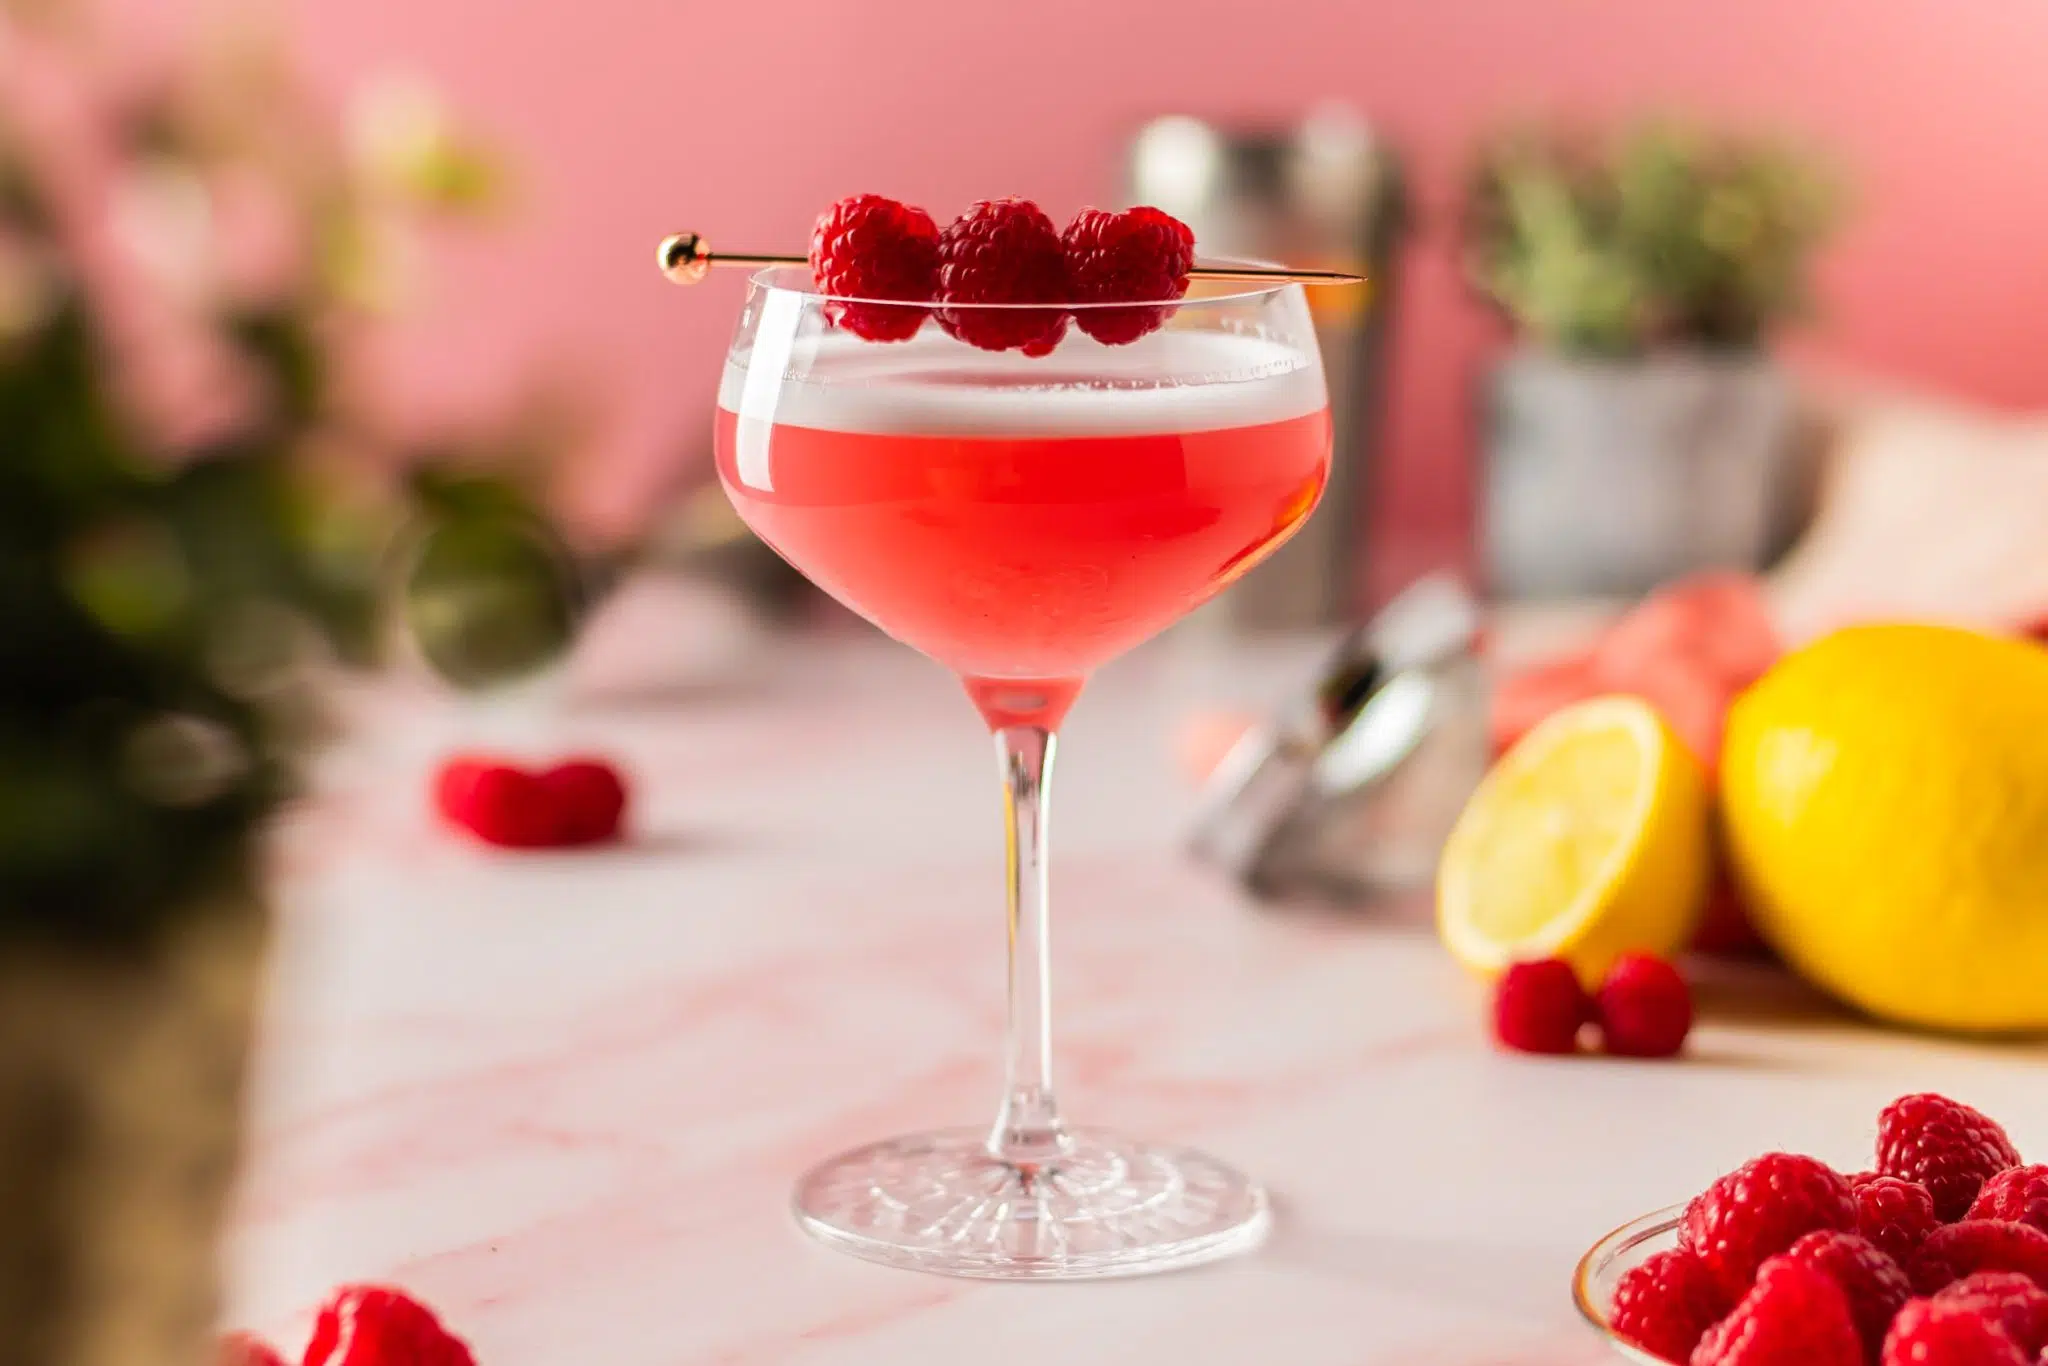 A side shot of a Cover Club cocktail in a cocktail glass on a white marmol table surrounded by fresh raspberries, two lemons, a plant and a shaker, in front of a pink wall.